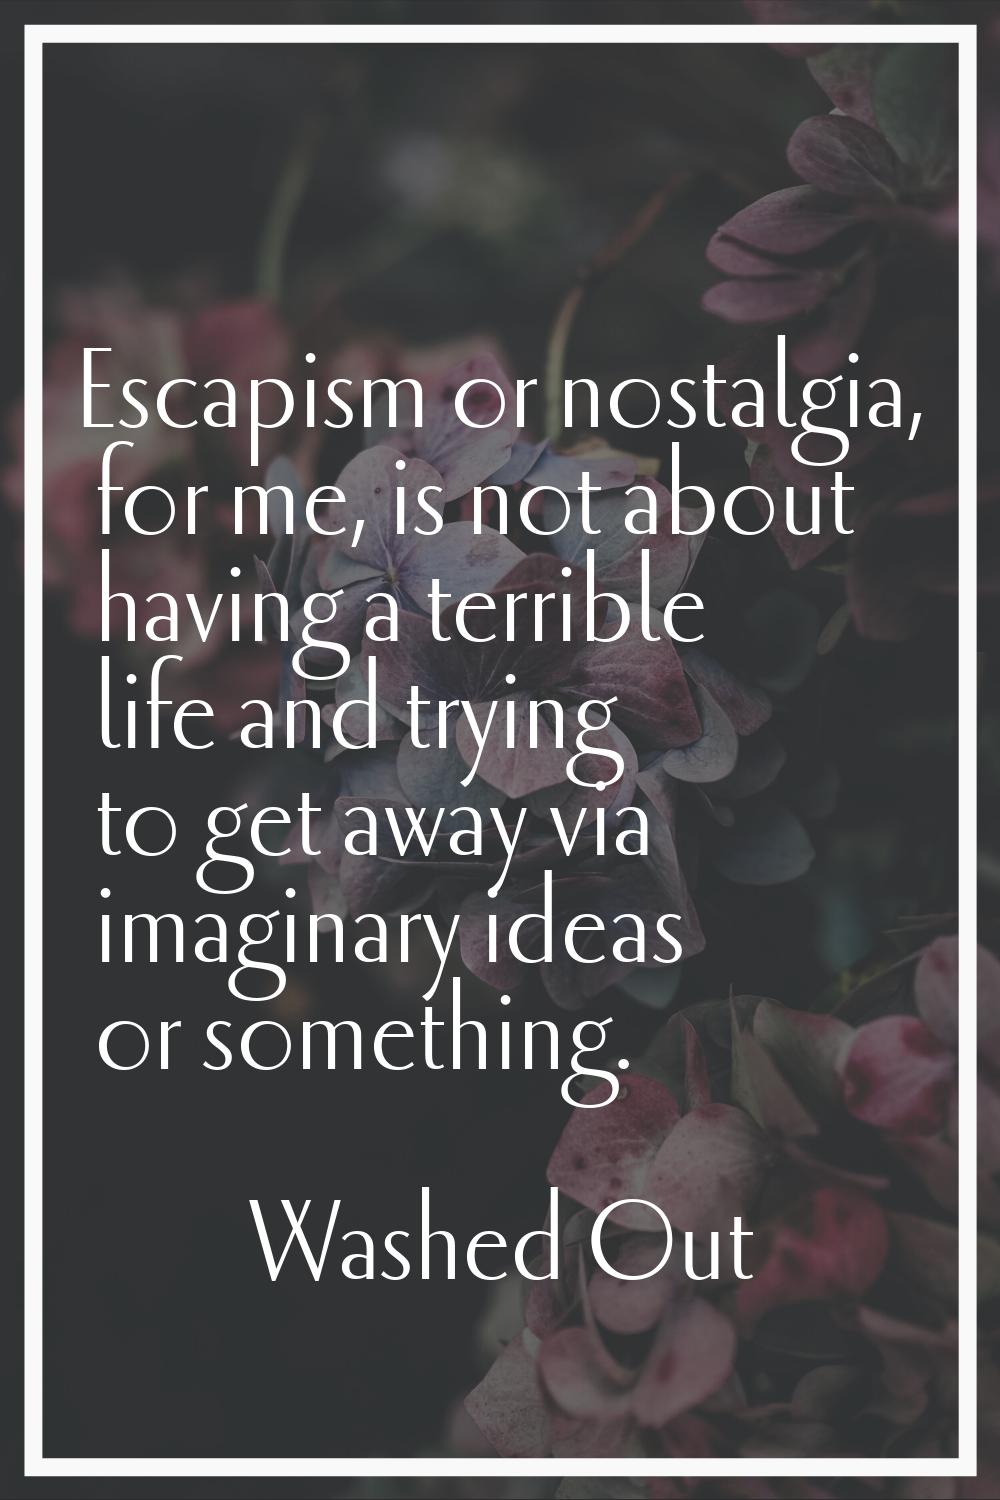 Escapism or nostalgia, for me, is not about having a terrible life and trying to get away via imagi